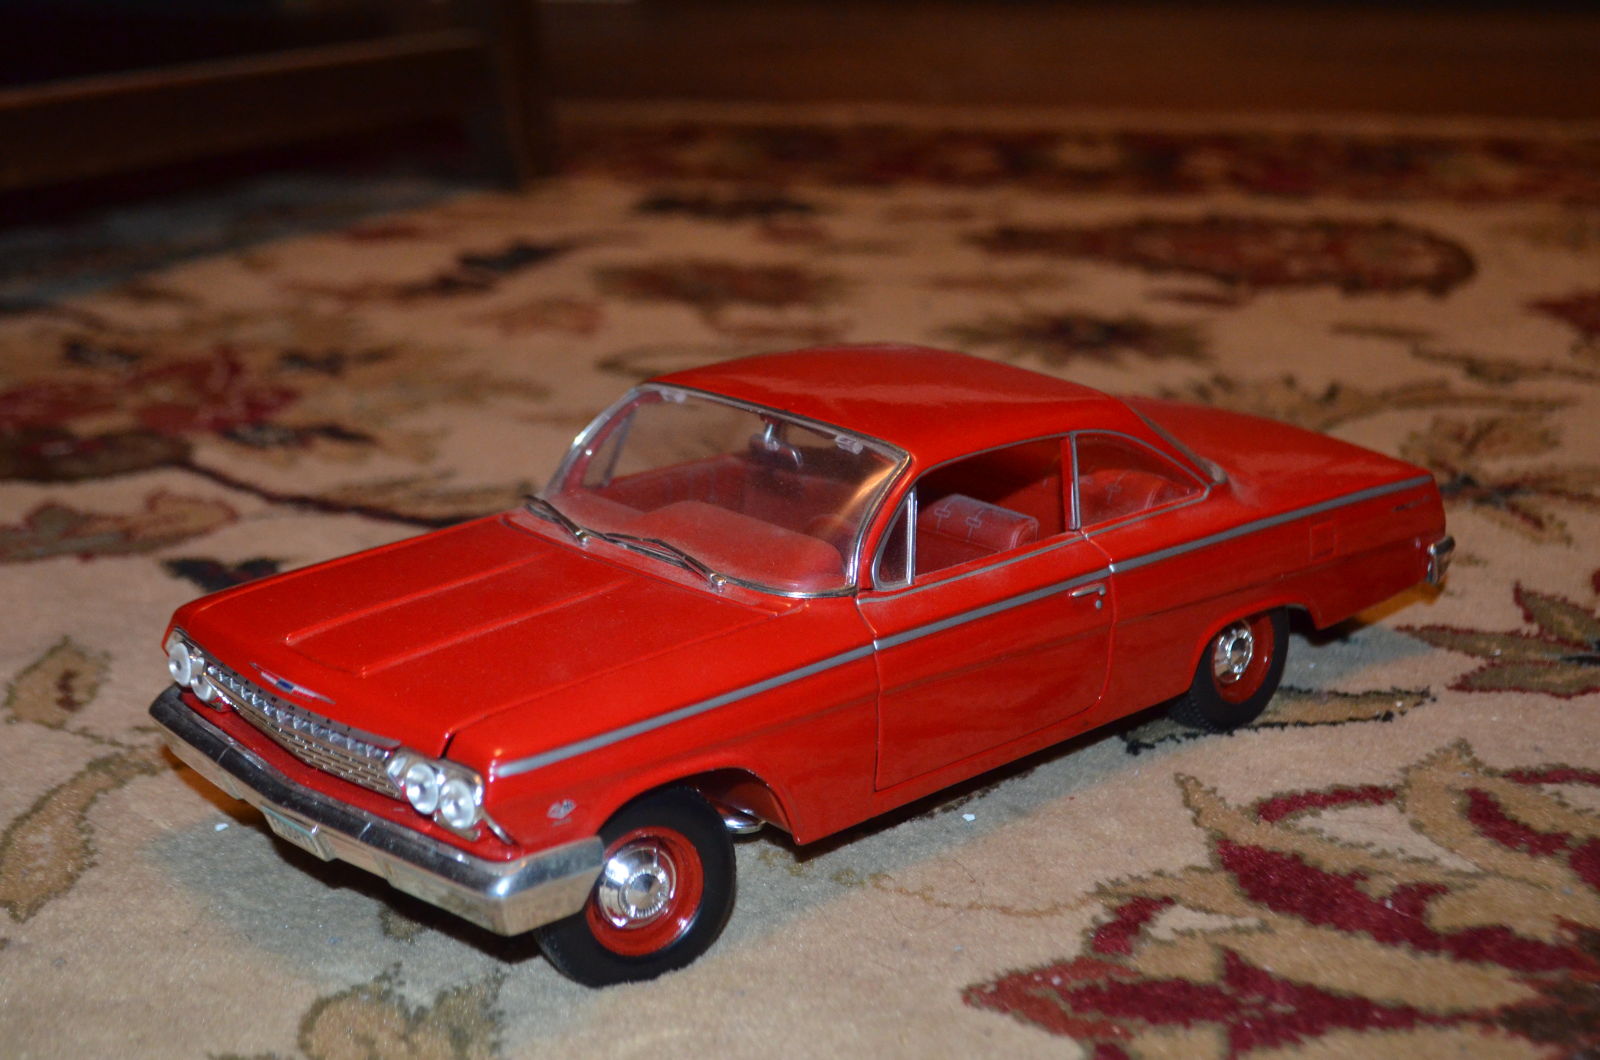  1/18 ‘62 Chevy Impala 409. No obvious issues besides dust.  